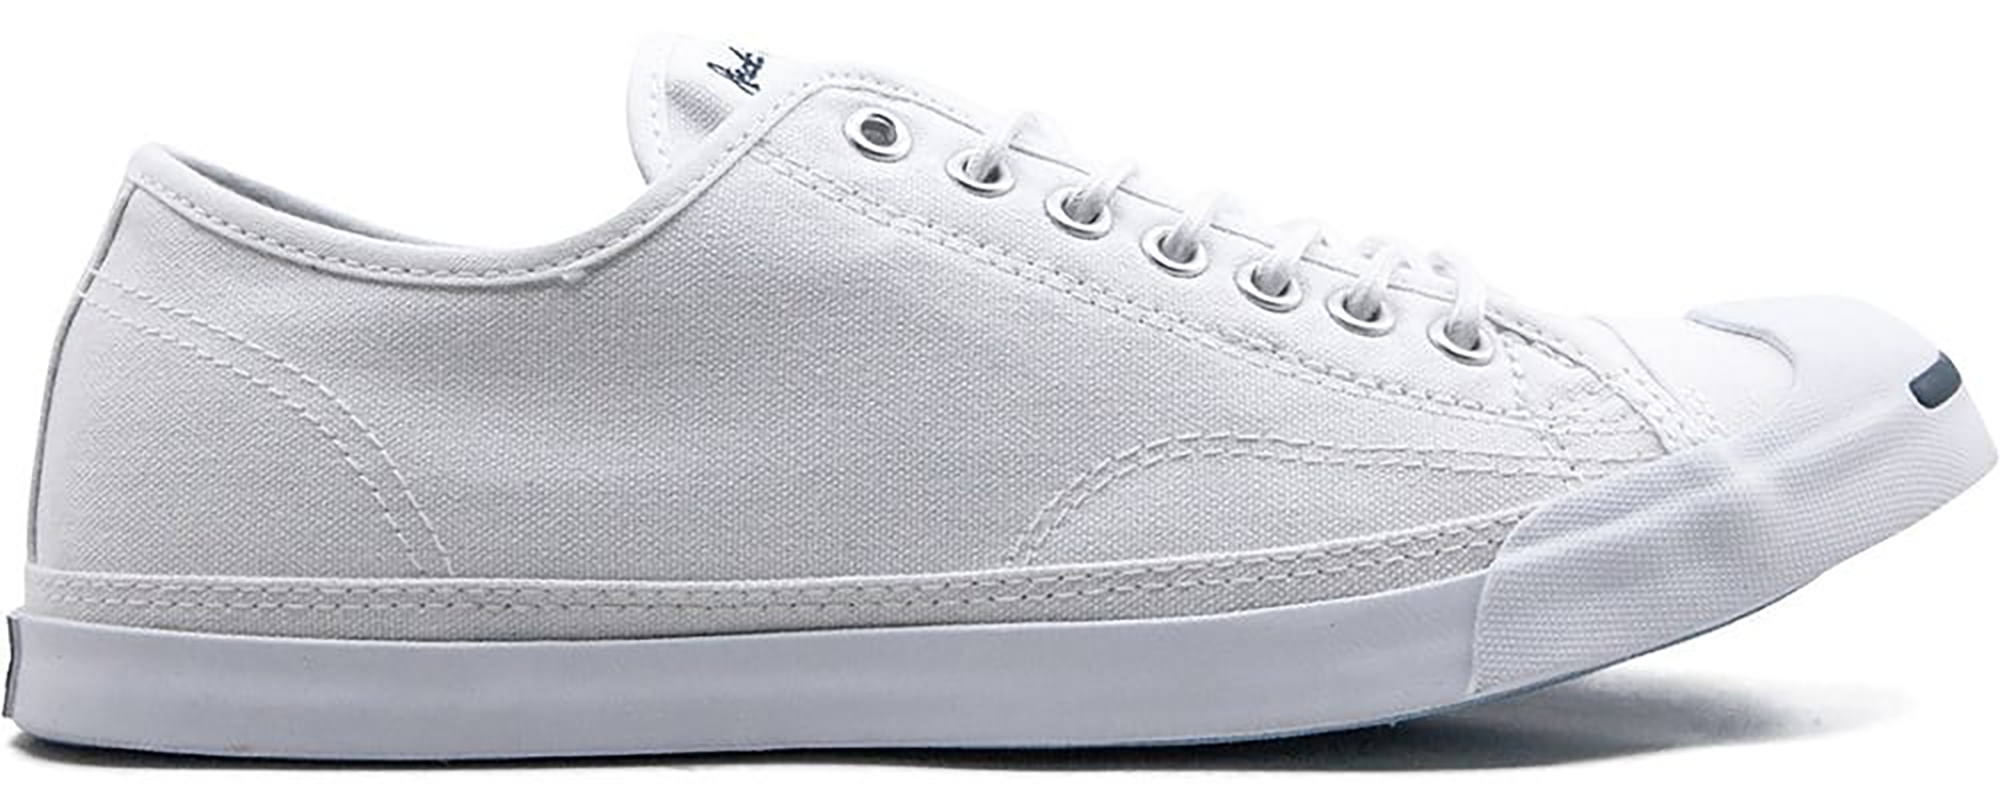 converse jack purcell low profile low top unisex slip